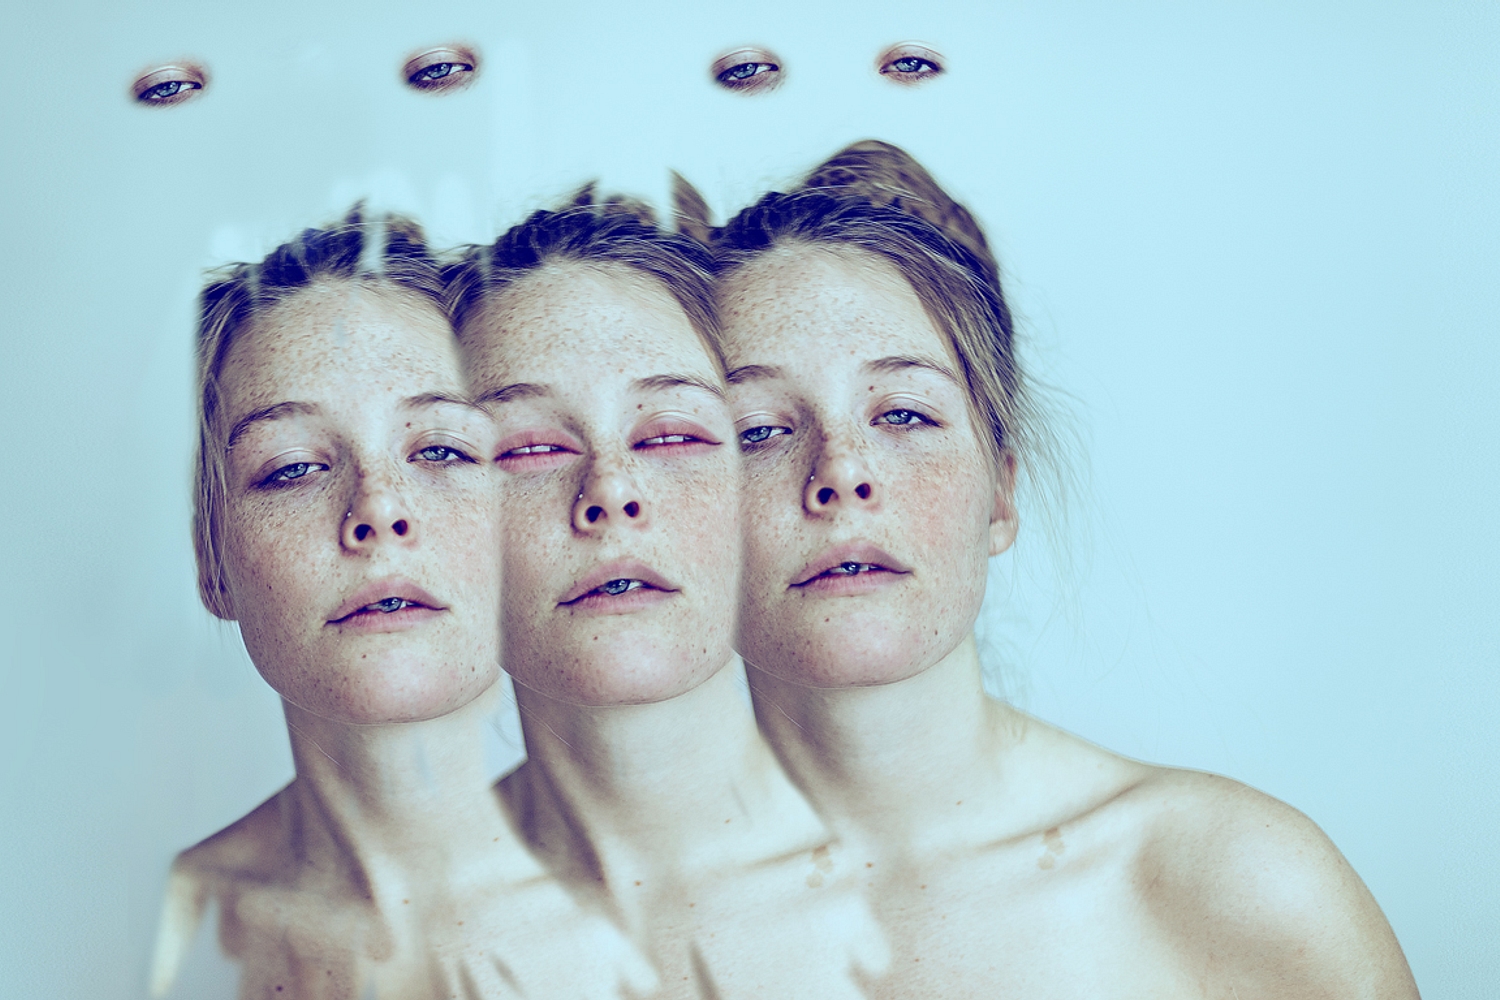 Maggie Rogers airs new track ‘On + Off’